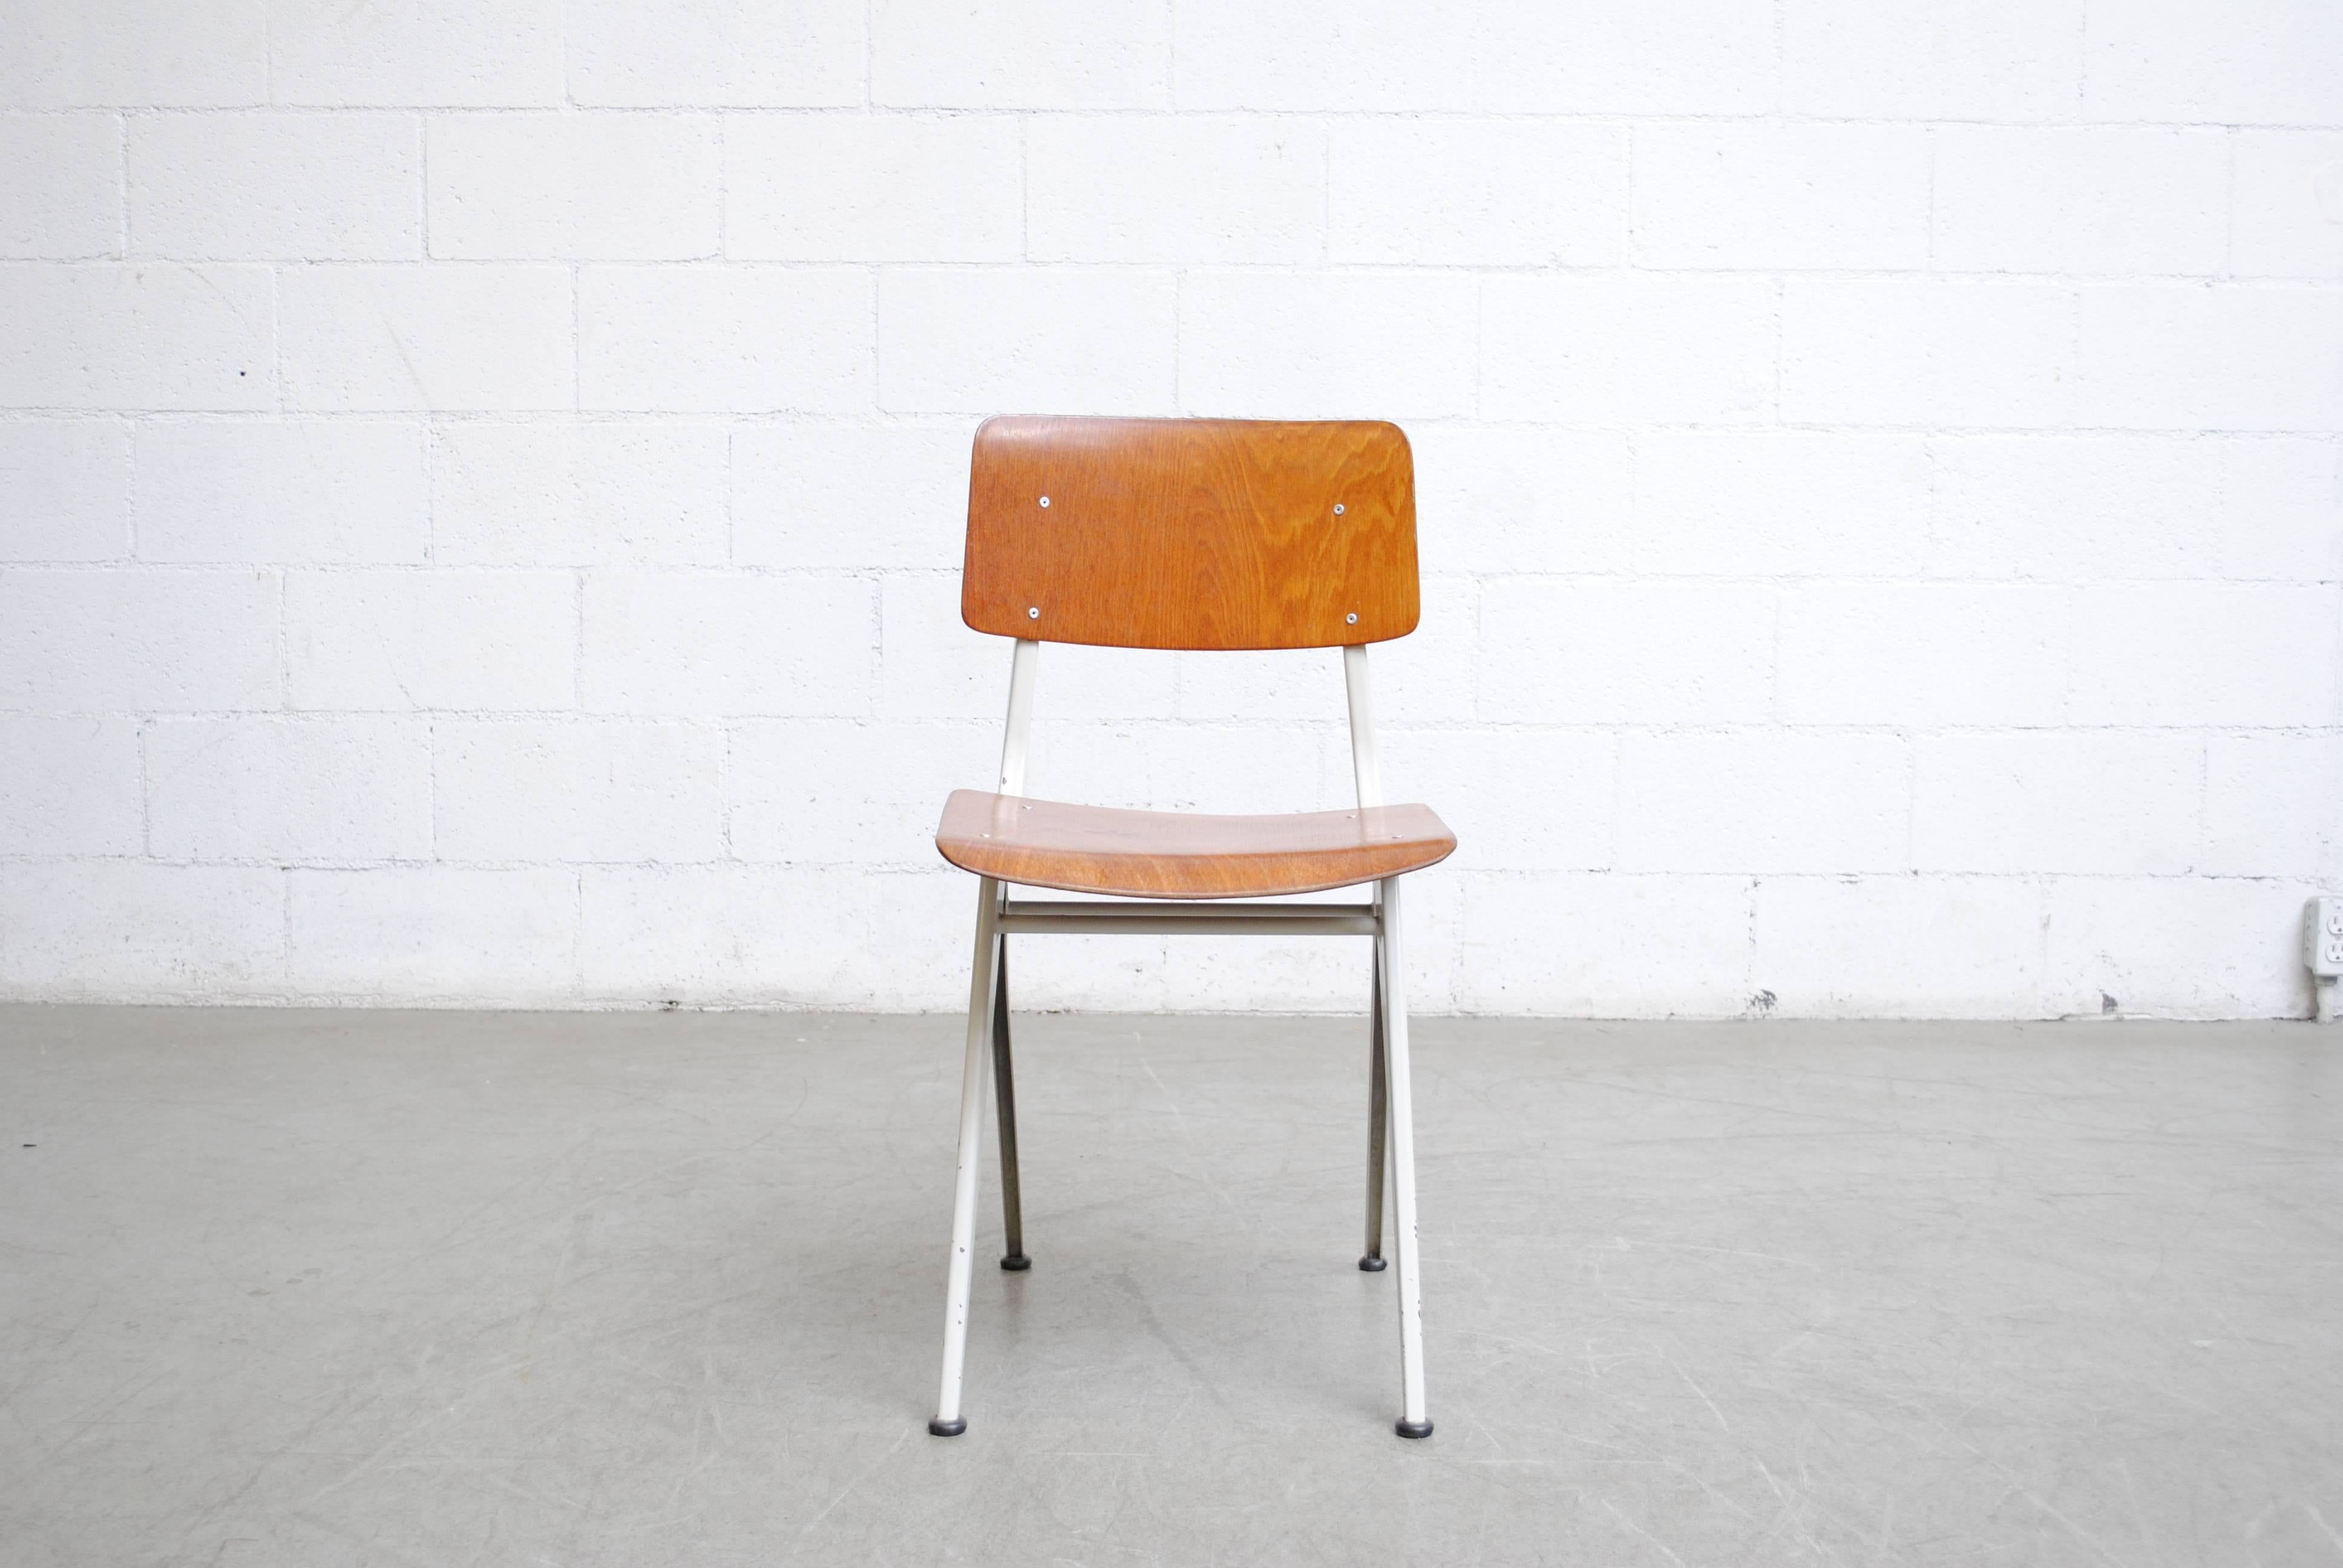 Industrial sheet metal frame in light grey with teak toned plywood seat and back. Visible wear consistent with their age and usage.